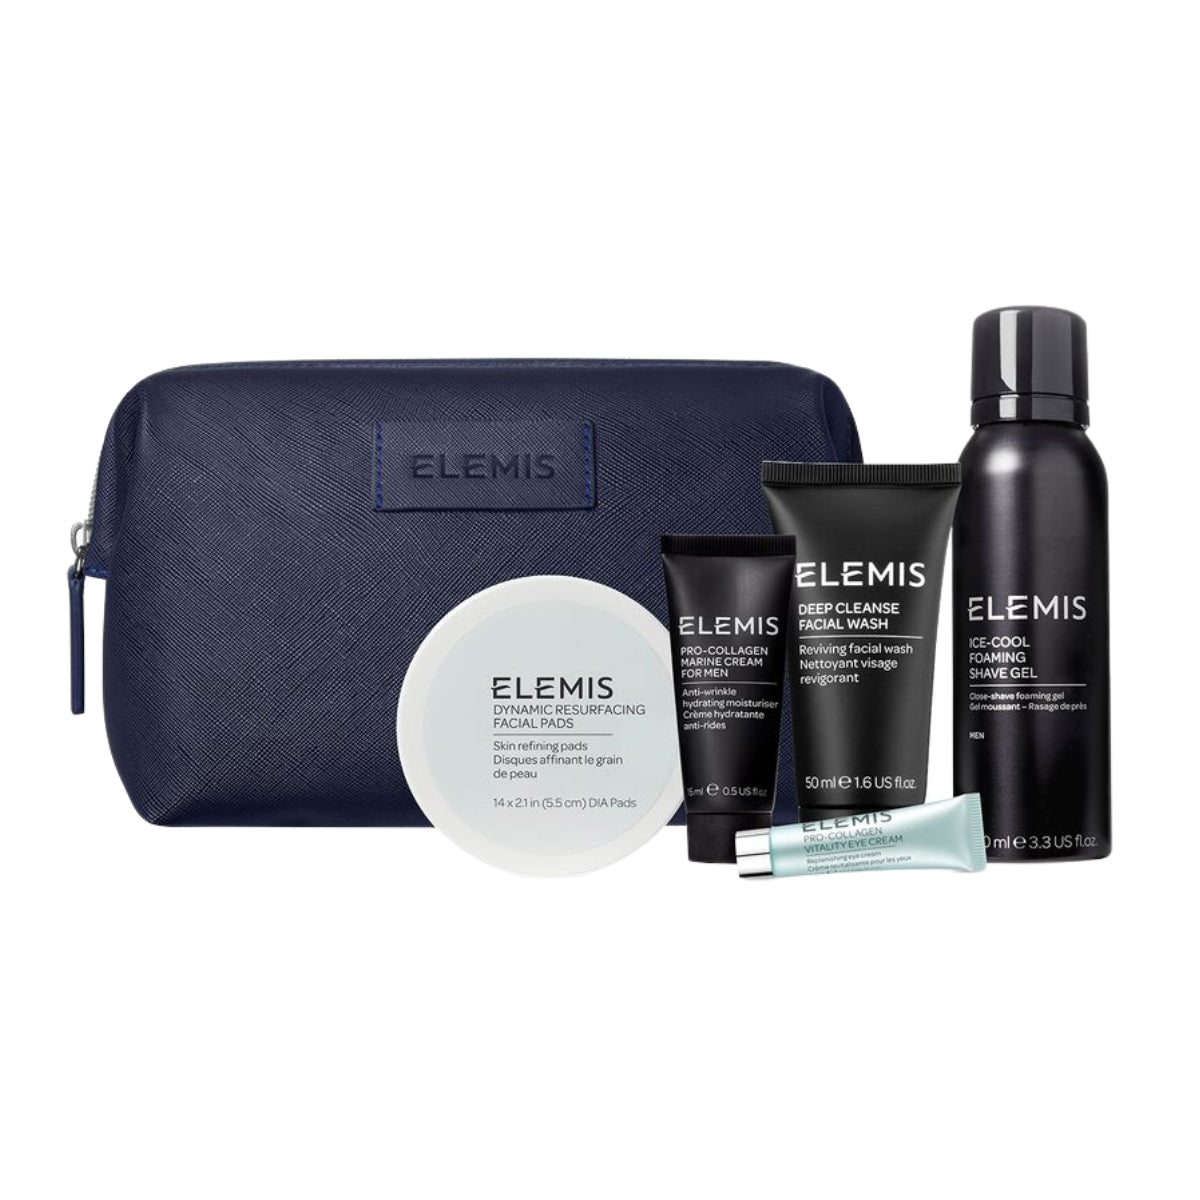 Elemis The First Class Grooming Edit Gift Set